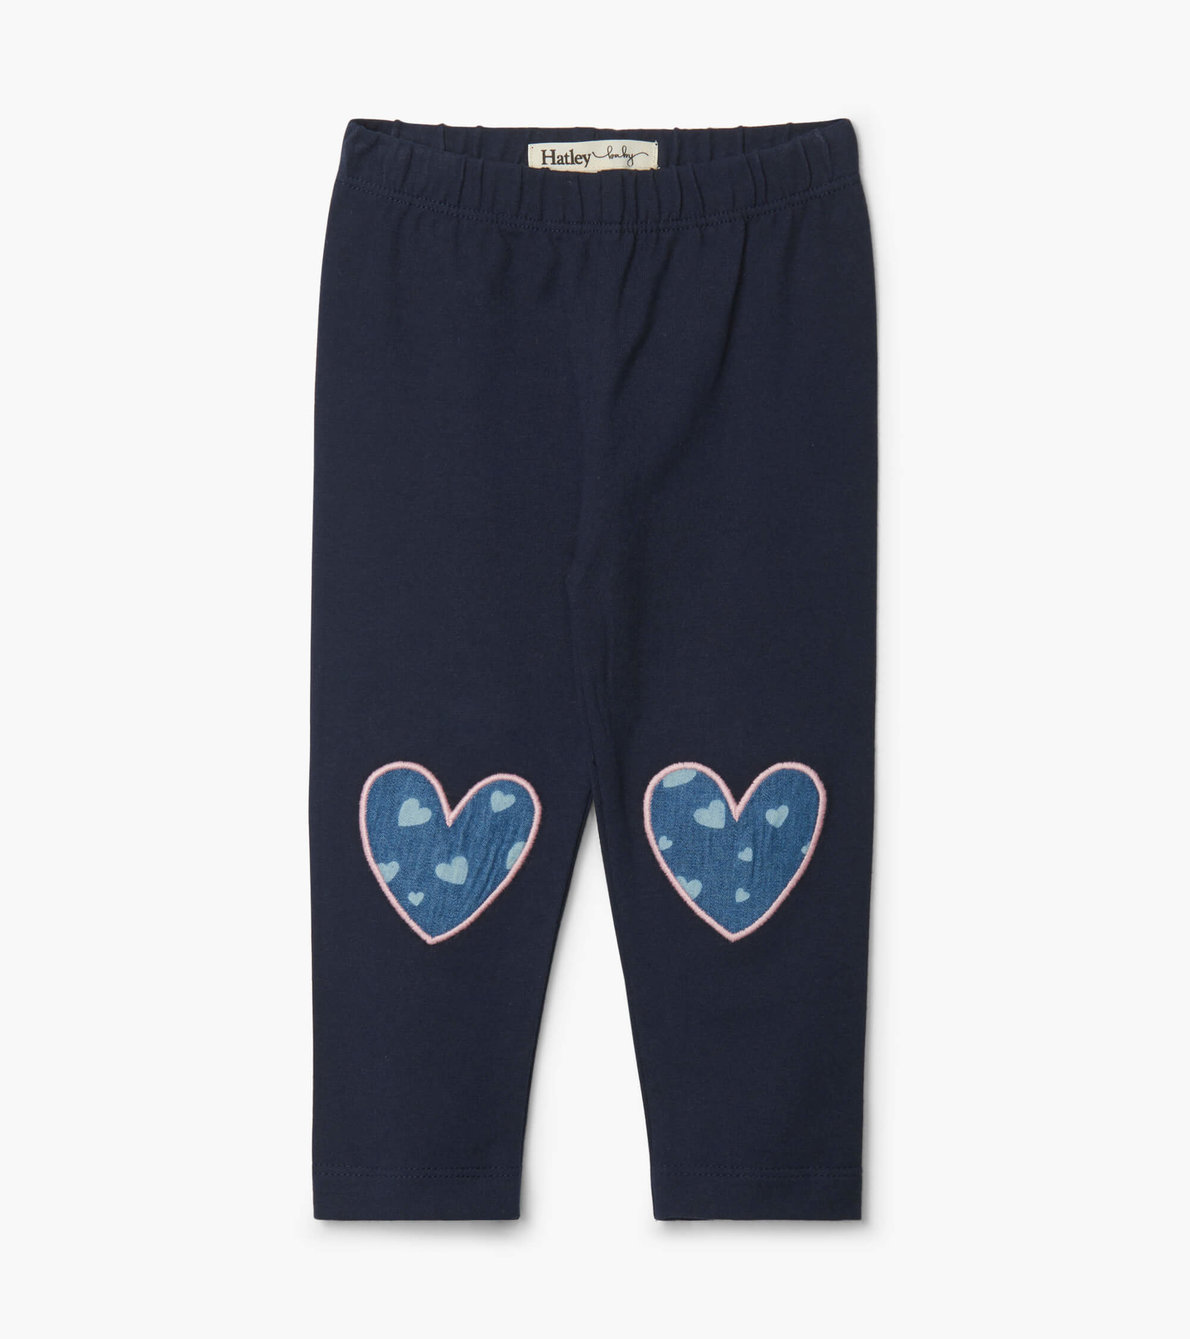 View larger image of Navy Hearts Baby Leggings